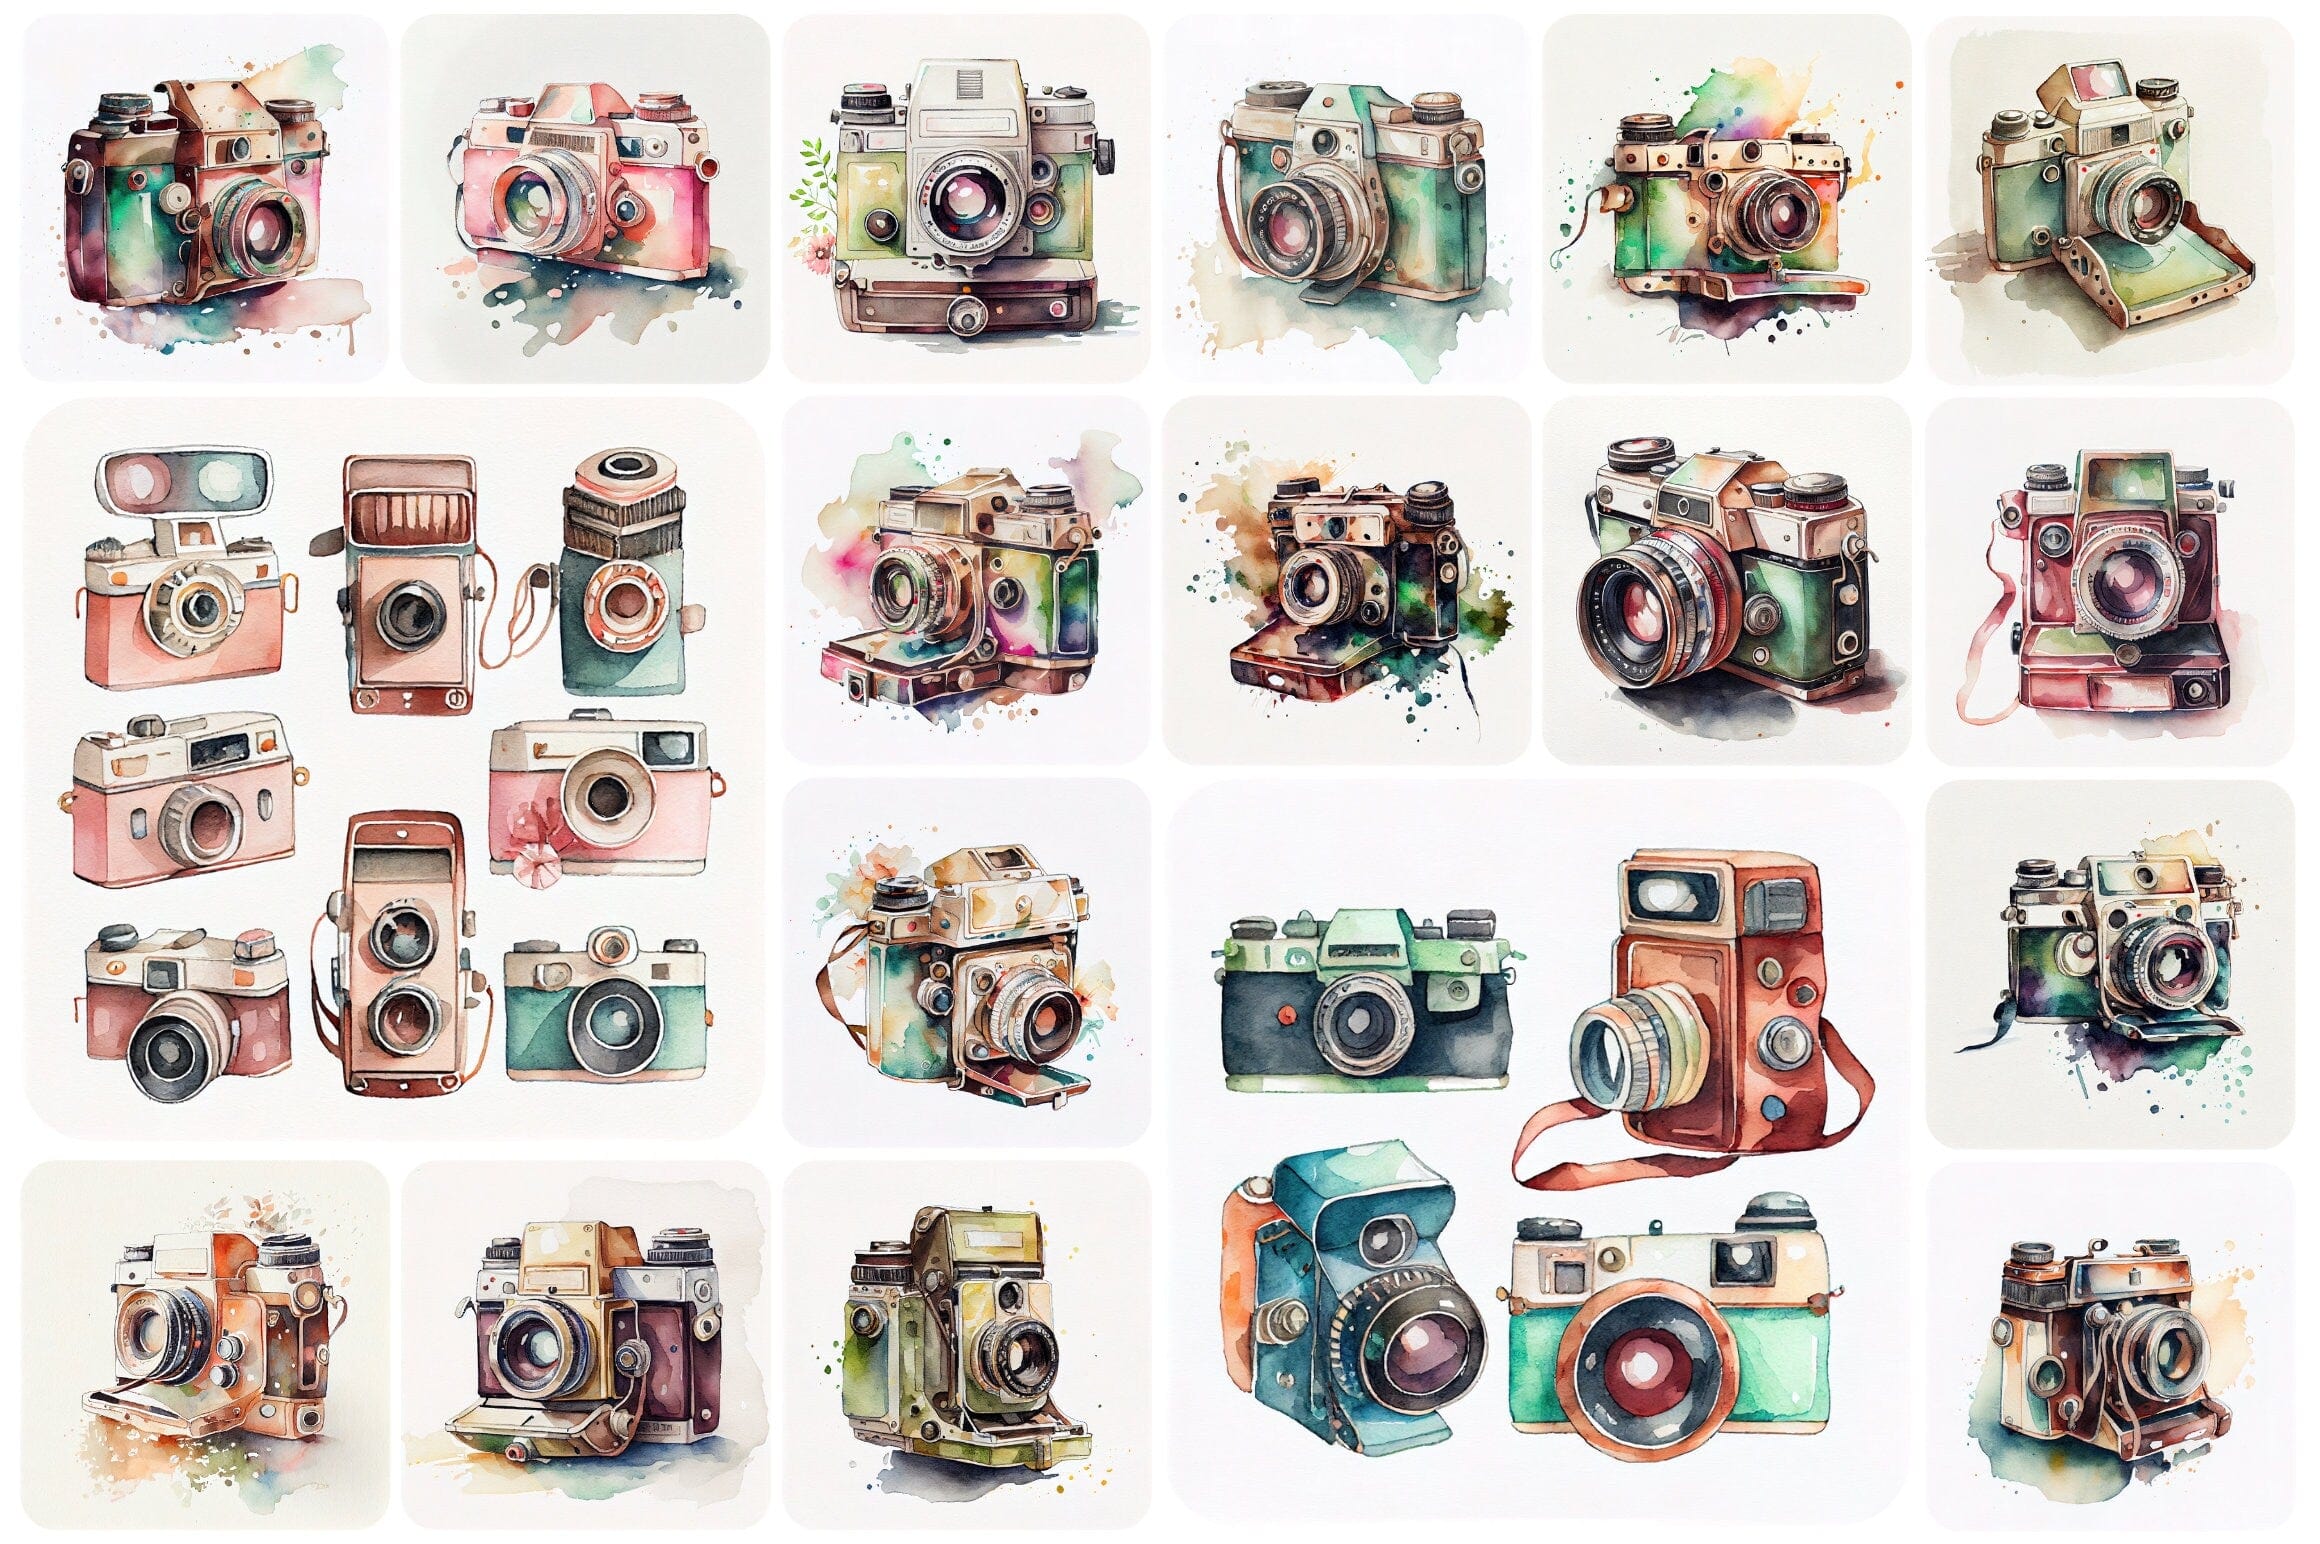 Vintage Camera Love: A Valentine's Day Clipart Collection with Retro Cameras and Watercolor Florals - Retro Vintage Watercolor Cameras Digital Download Sumobundle